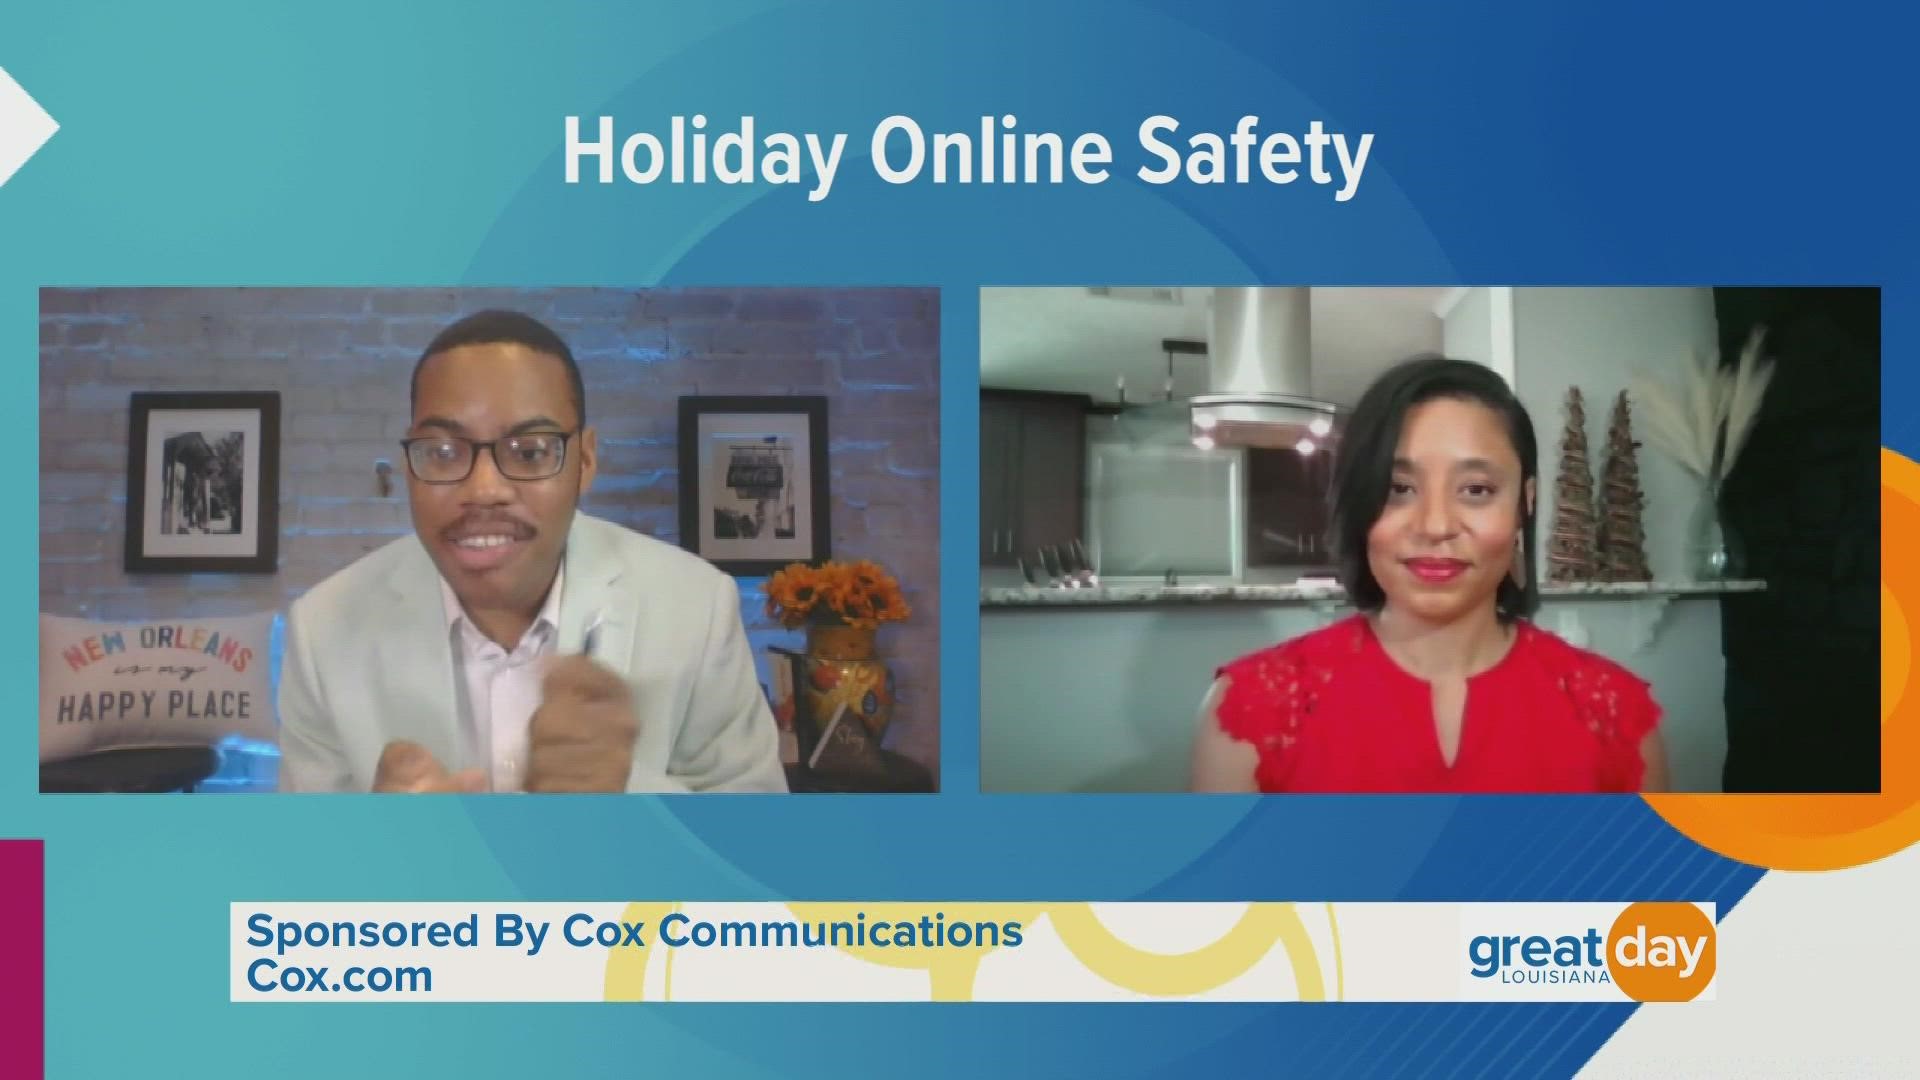 Protecting your home and personal information is of utmost importance this holiday season, and Cox gives us tips to stay safe.